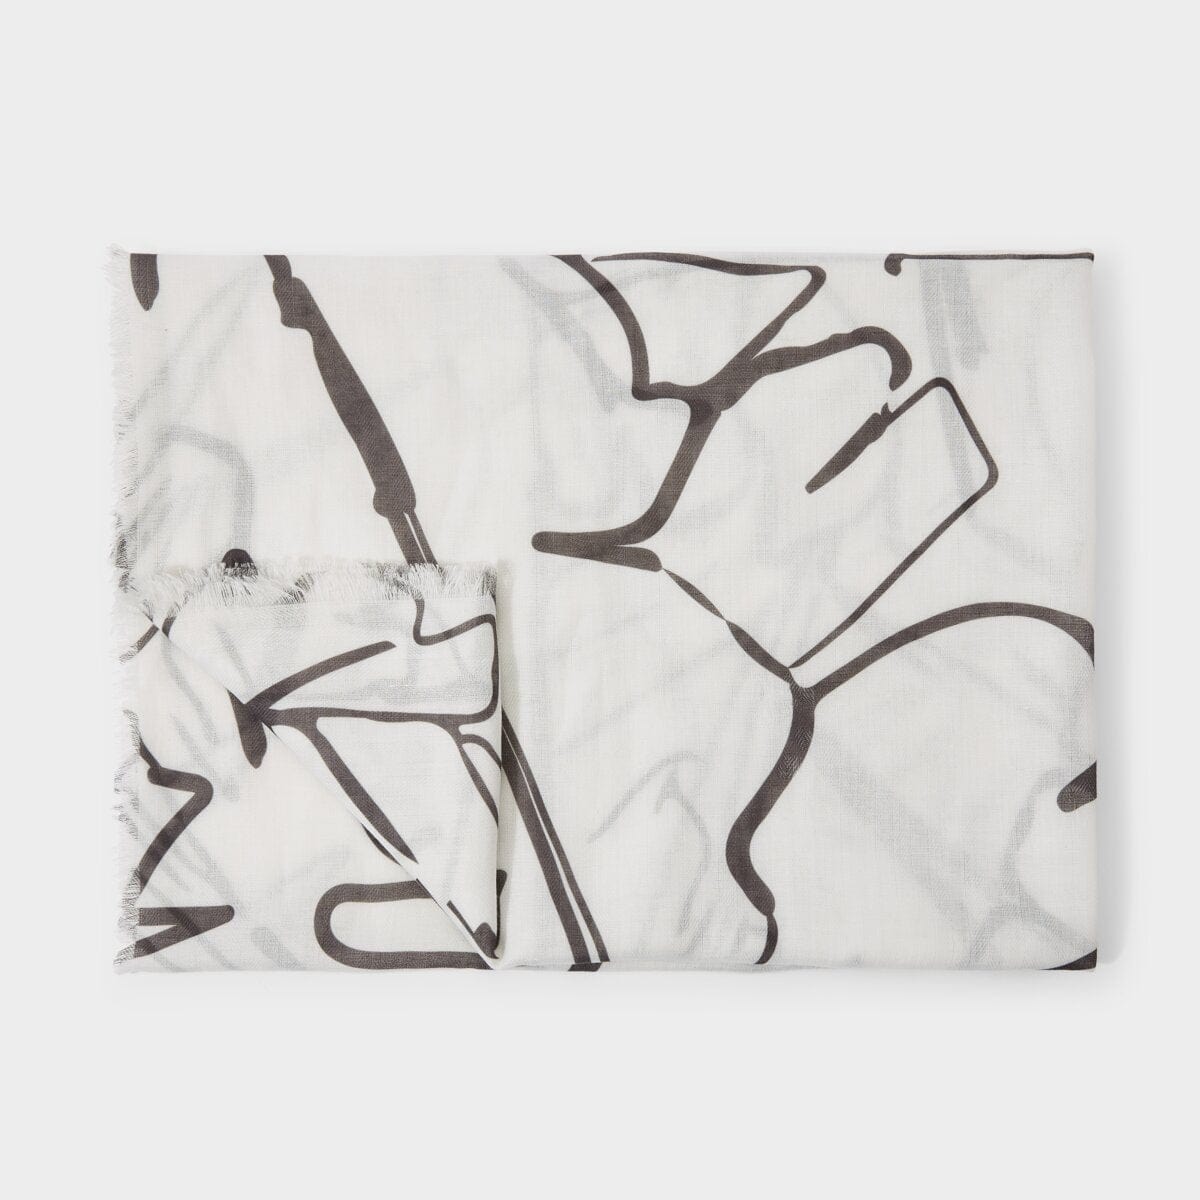 Katie Loxton Scarf Katie Loxton Scarf - Abstract Palm Leaf Print - White and Charcoal